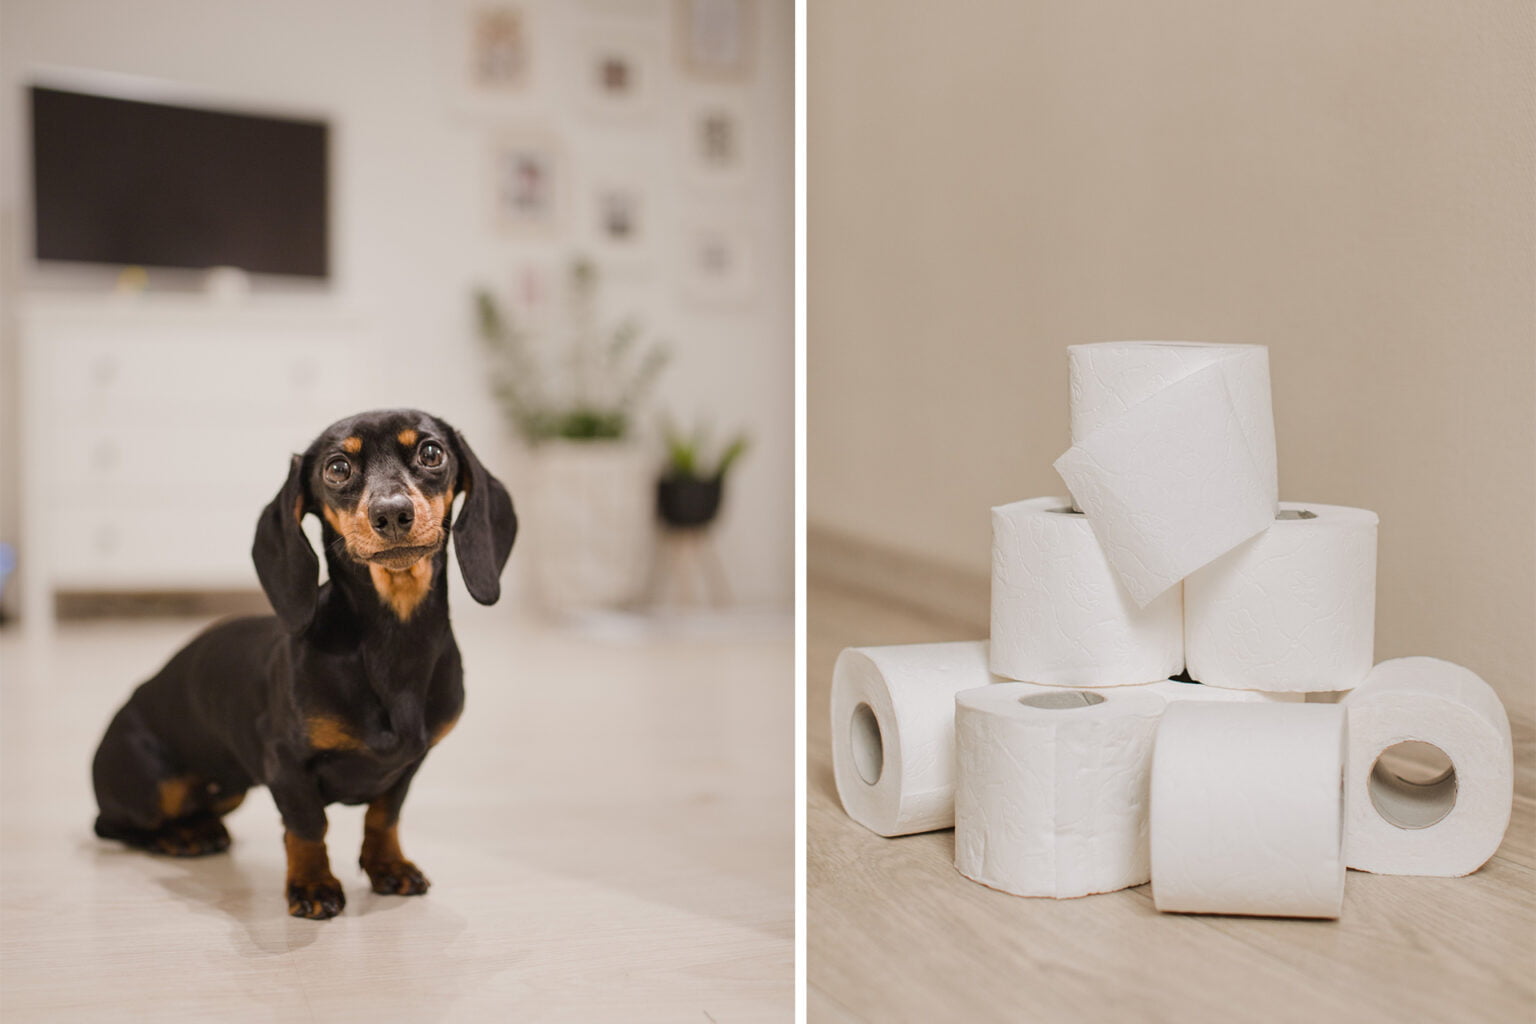 ﻿how to potty train an older dog in an apartment